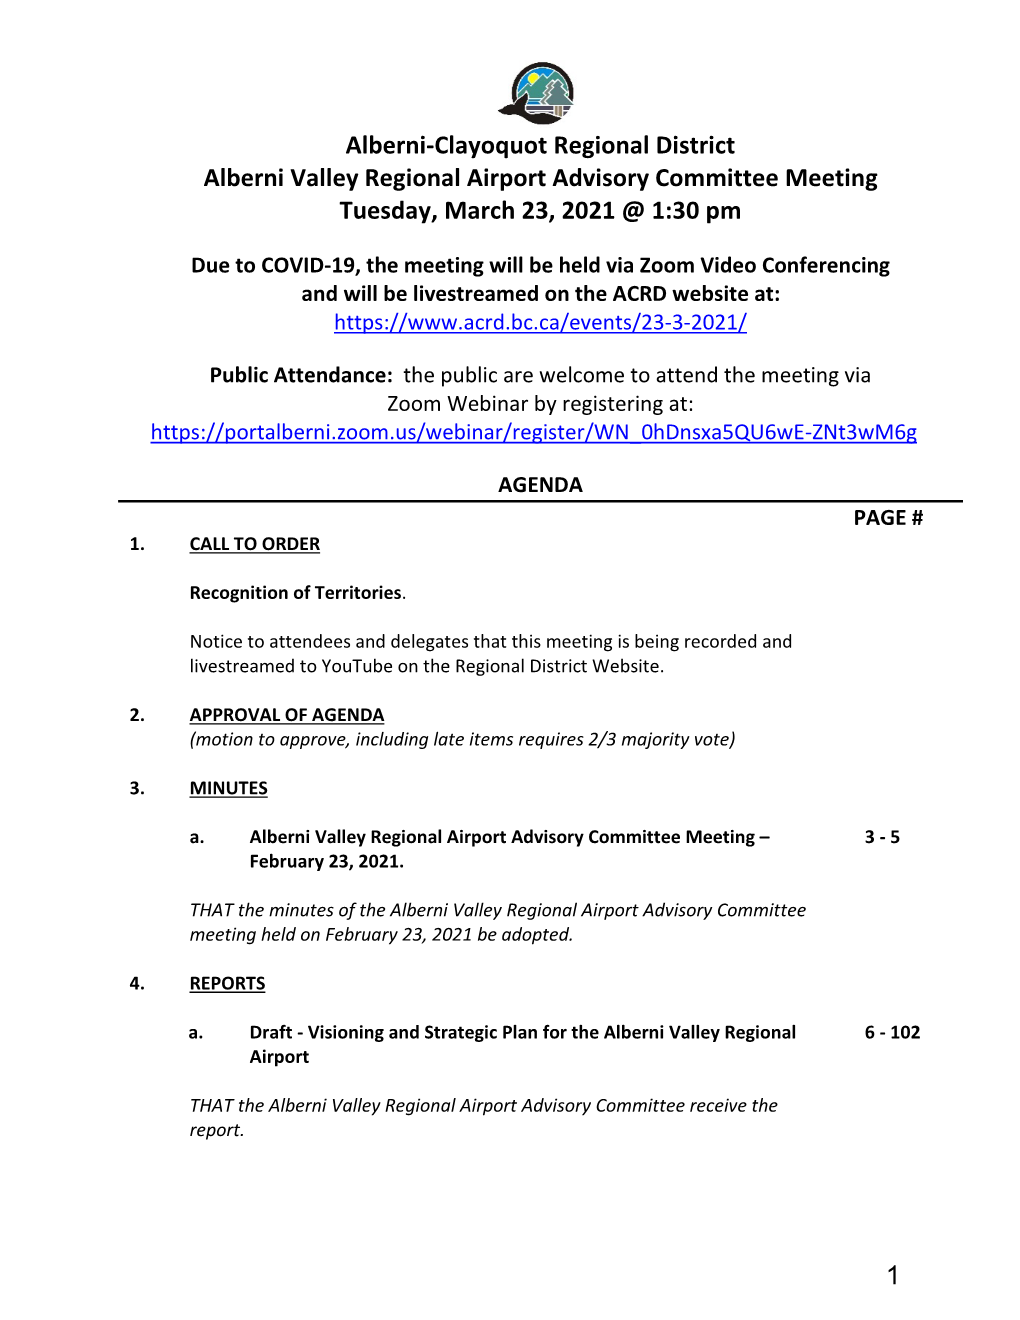 Alberni-Clayoquot Regional District Alberni Valley Regional Airport Advisory Committee Meeting Tuesday, March 23, 2021 @ 1:30 Pm